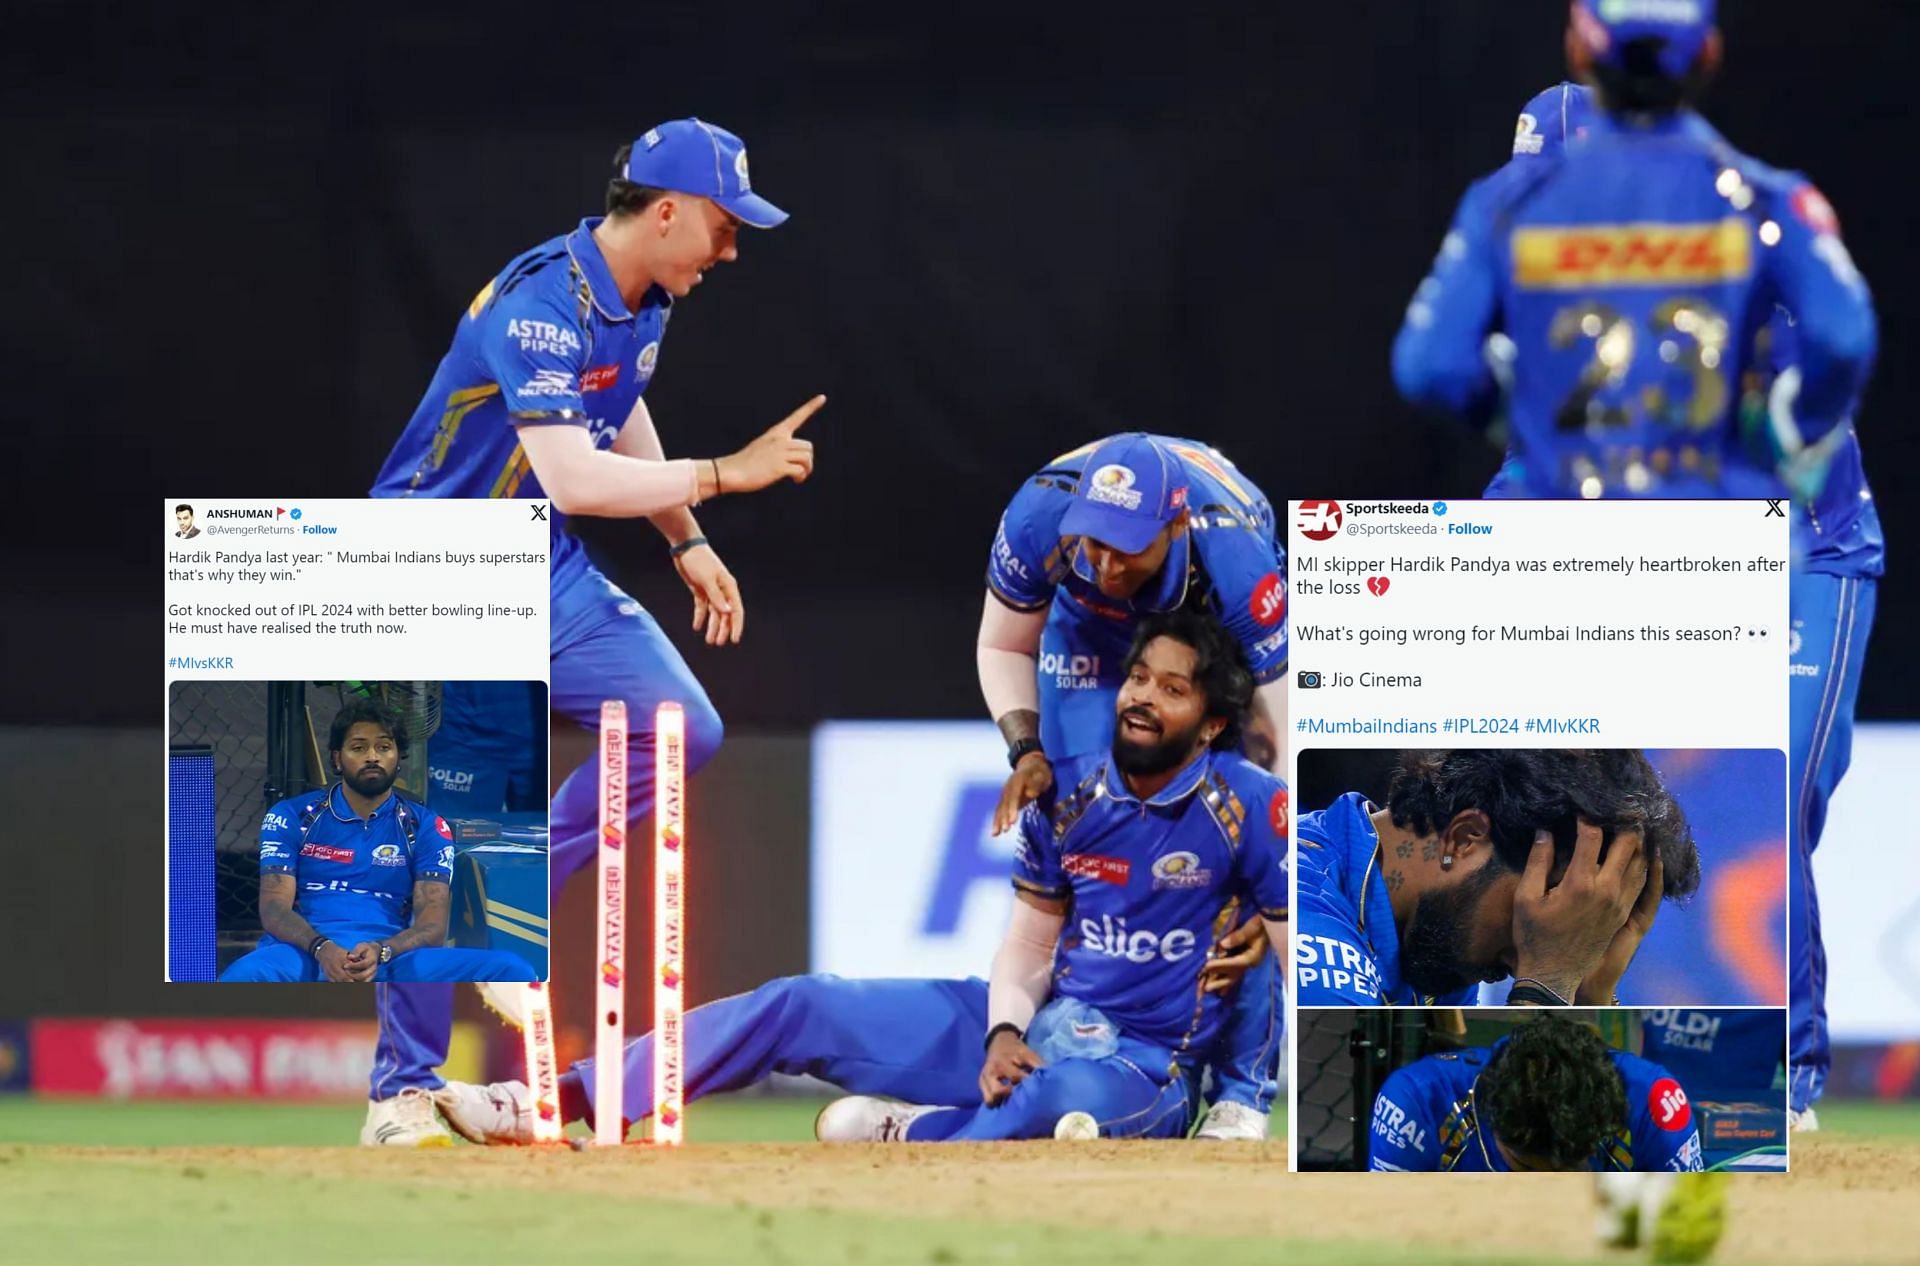 MI captain Hardik Pandya was disappointed after his team